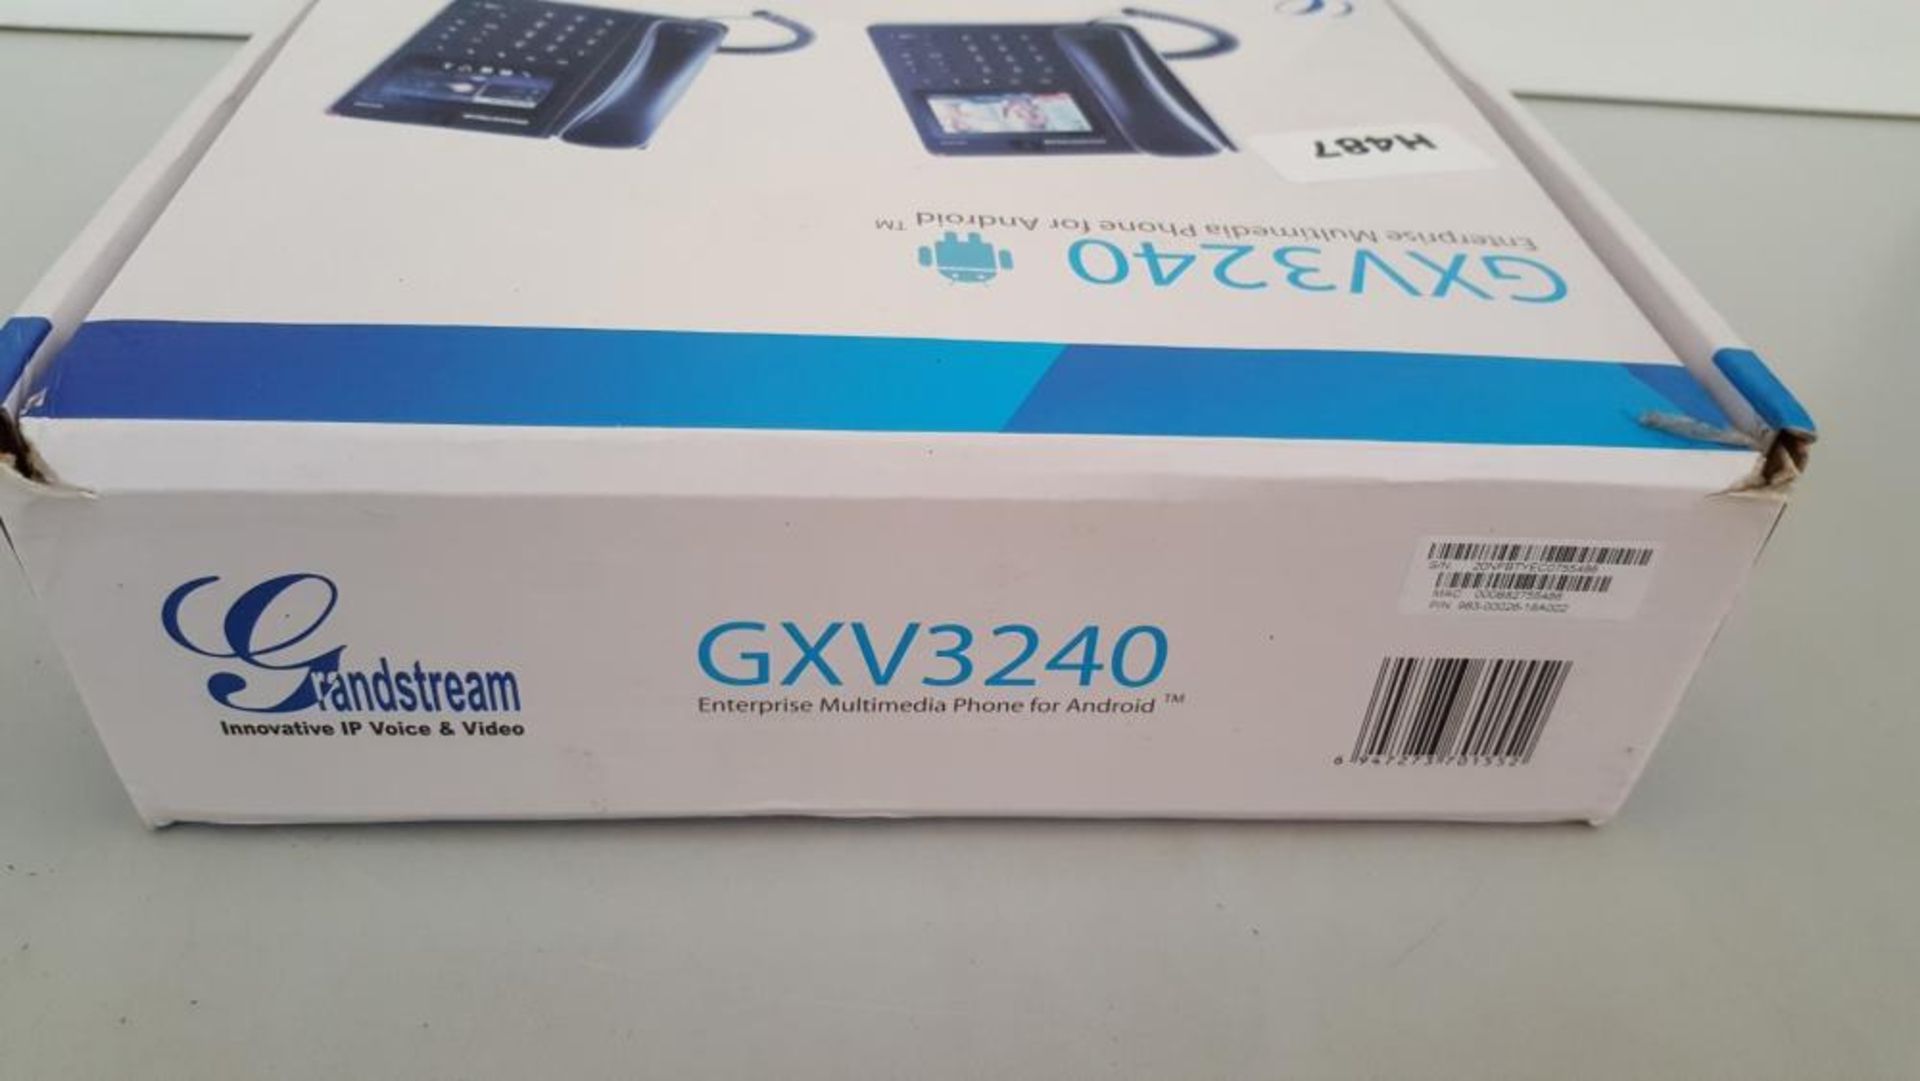 1 x Grandstream GXV3240 Multimedia IP Phone for Android - Ref H487 - CL011 - Location: Altrincham WA - Image 3 of 4